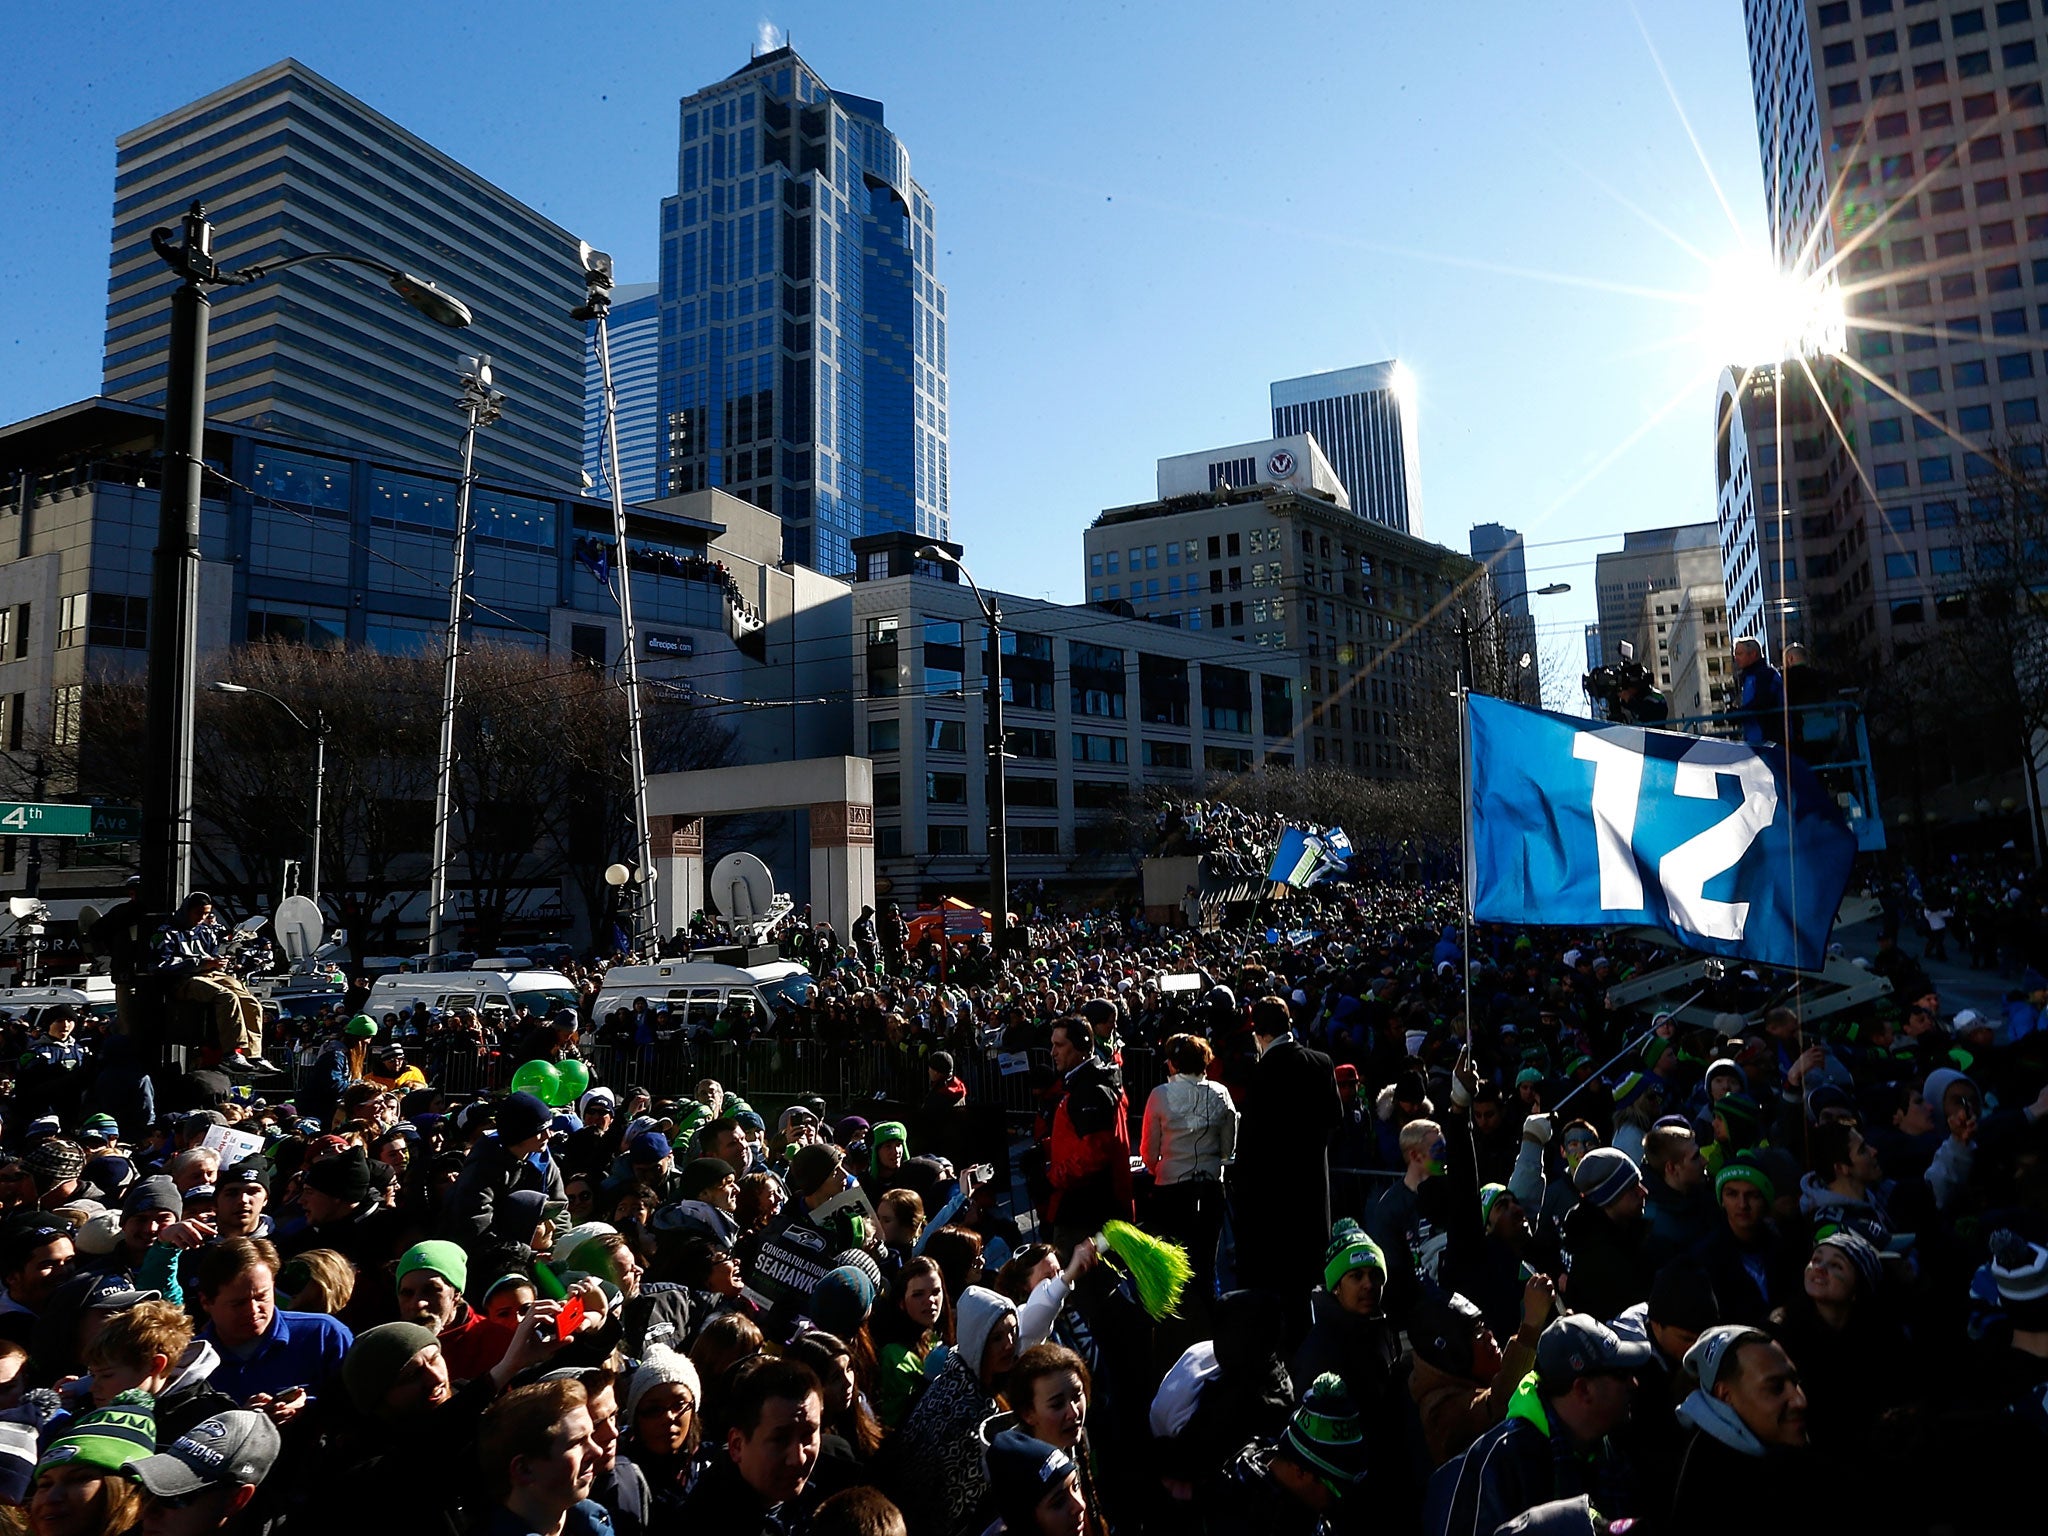 Seattle Seahawks fans turn out in strength to celebrate with the Super Bowl champions